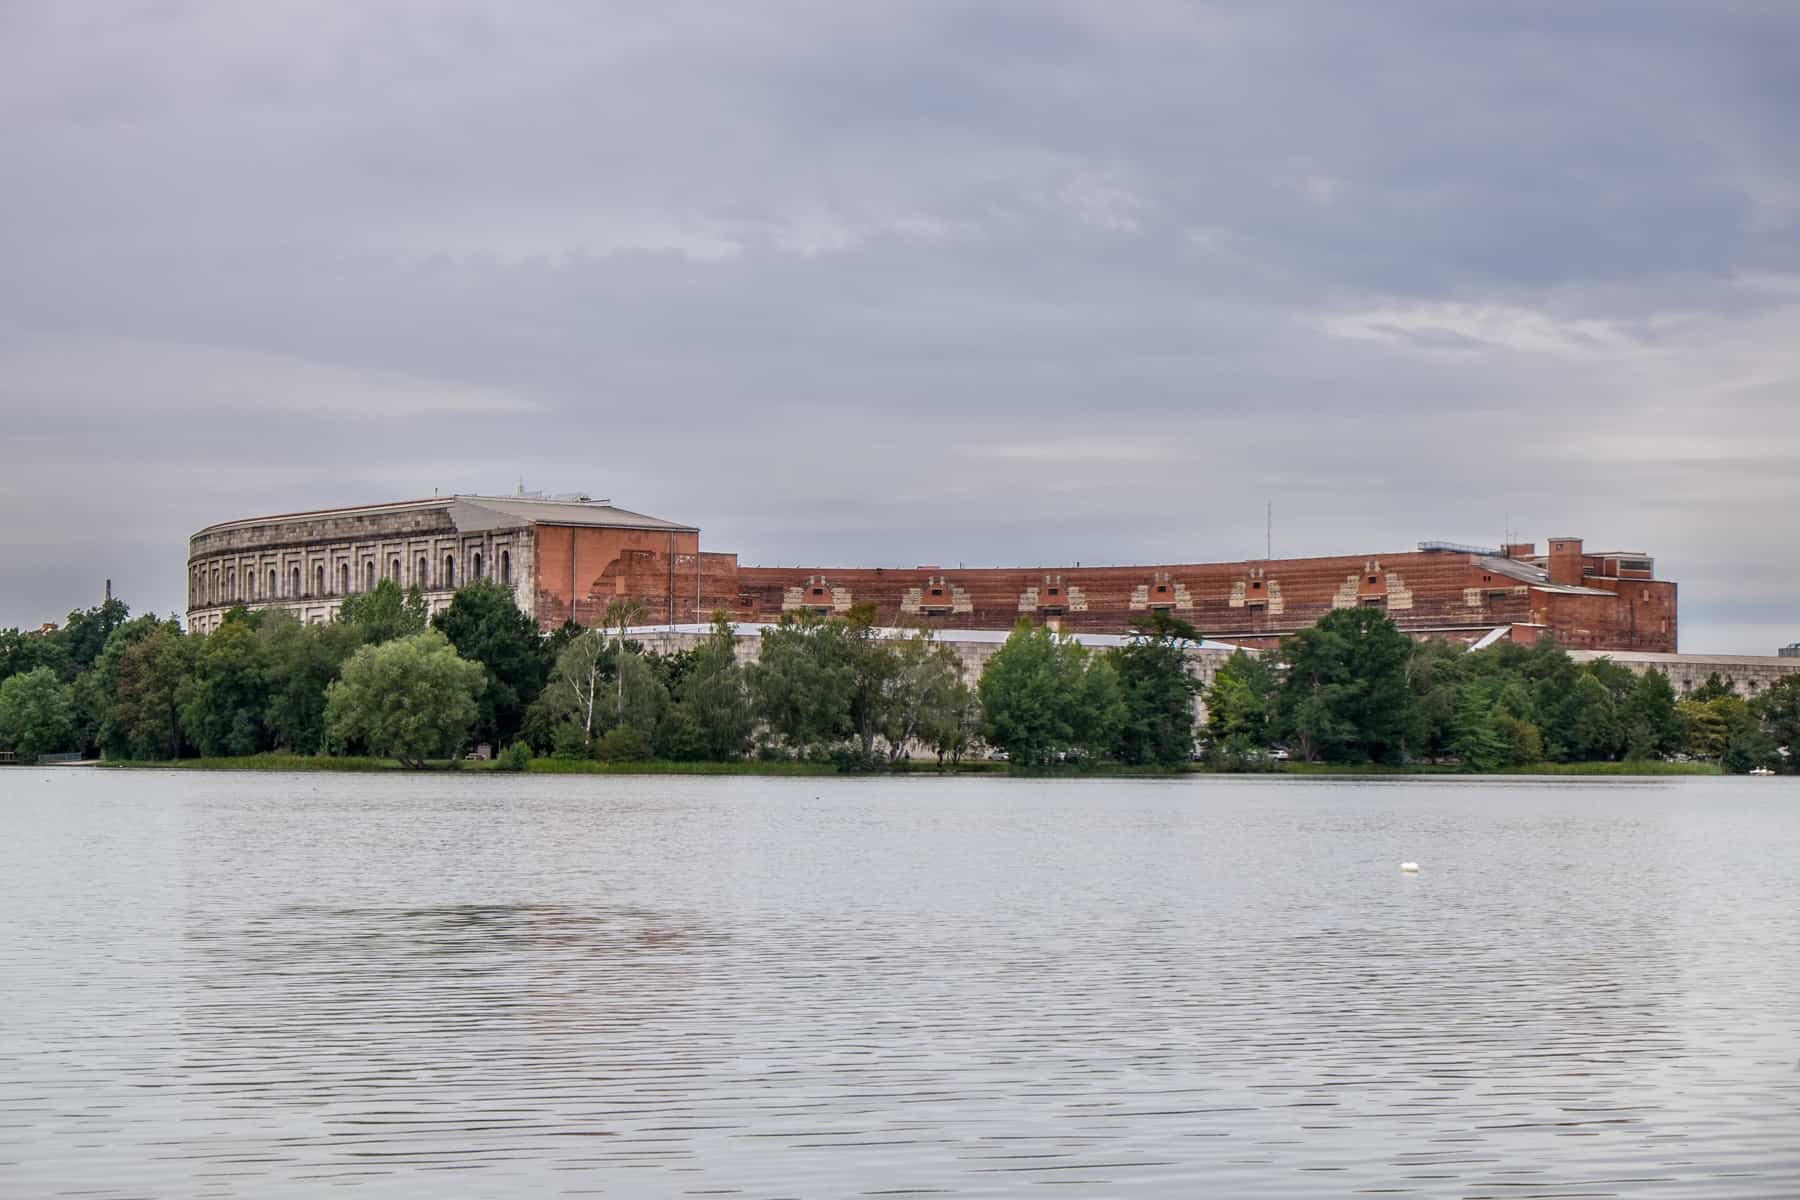 The unfinished Nazi Party Rally Ground site of the Congress Hall in Nuremberg - on the left is the part of the finished marble exterior and on the right the unfinished brick inner courtyard arena